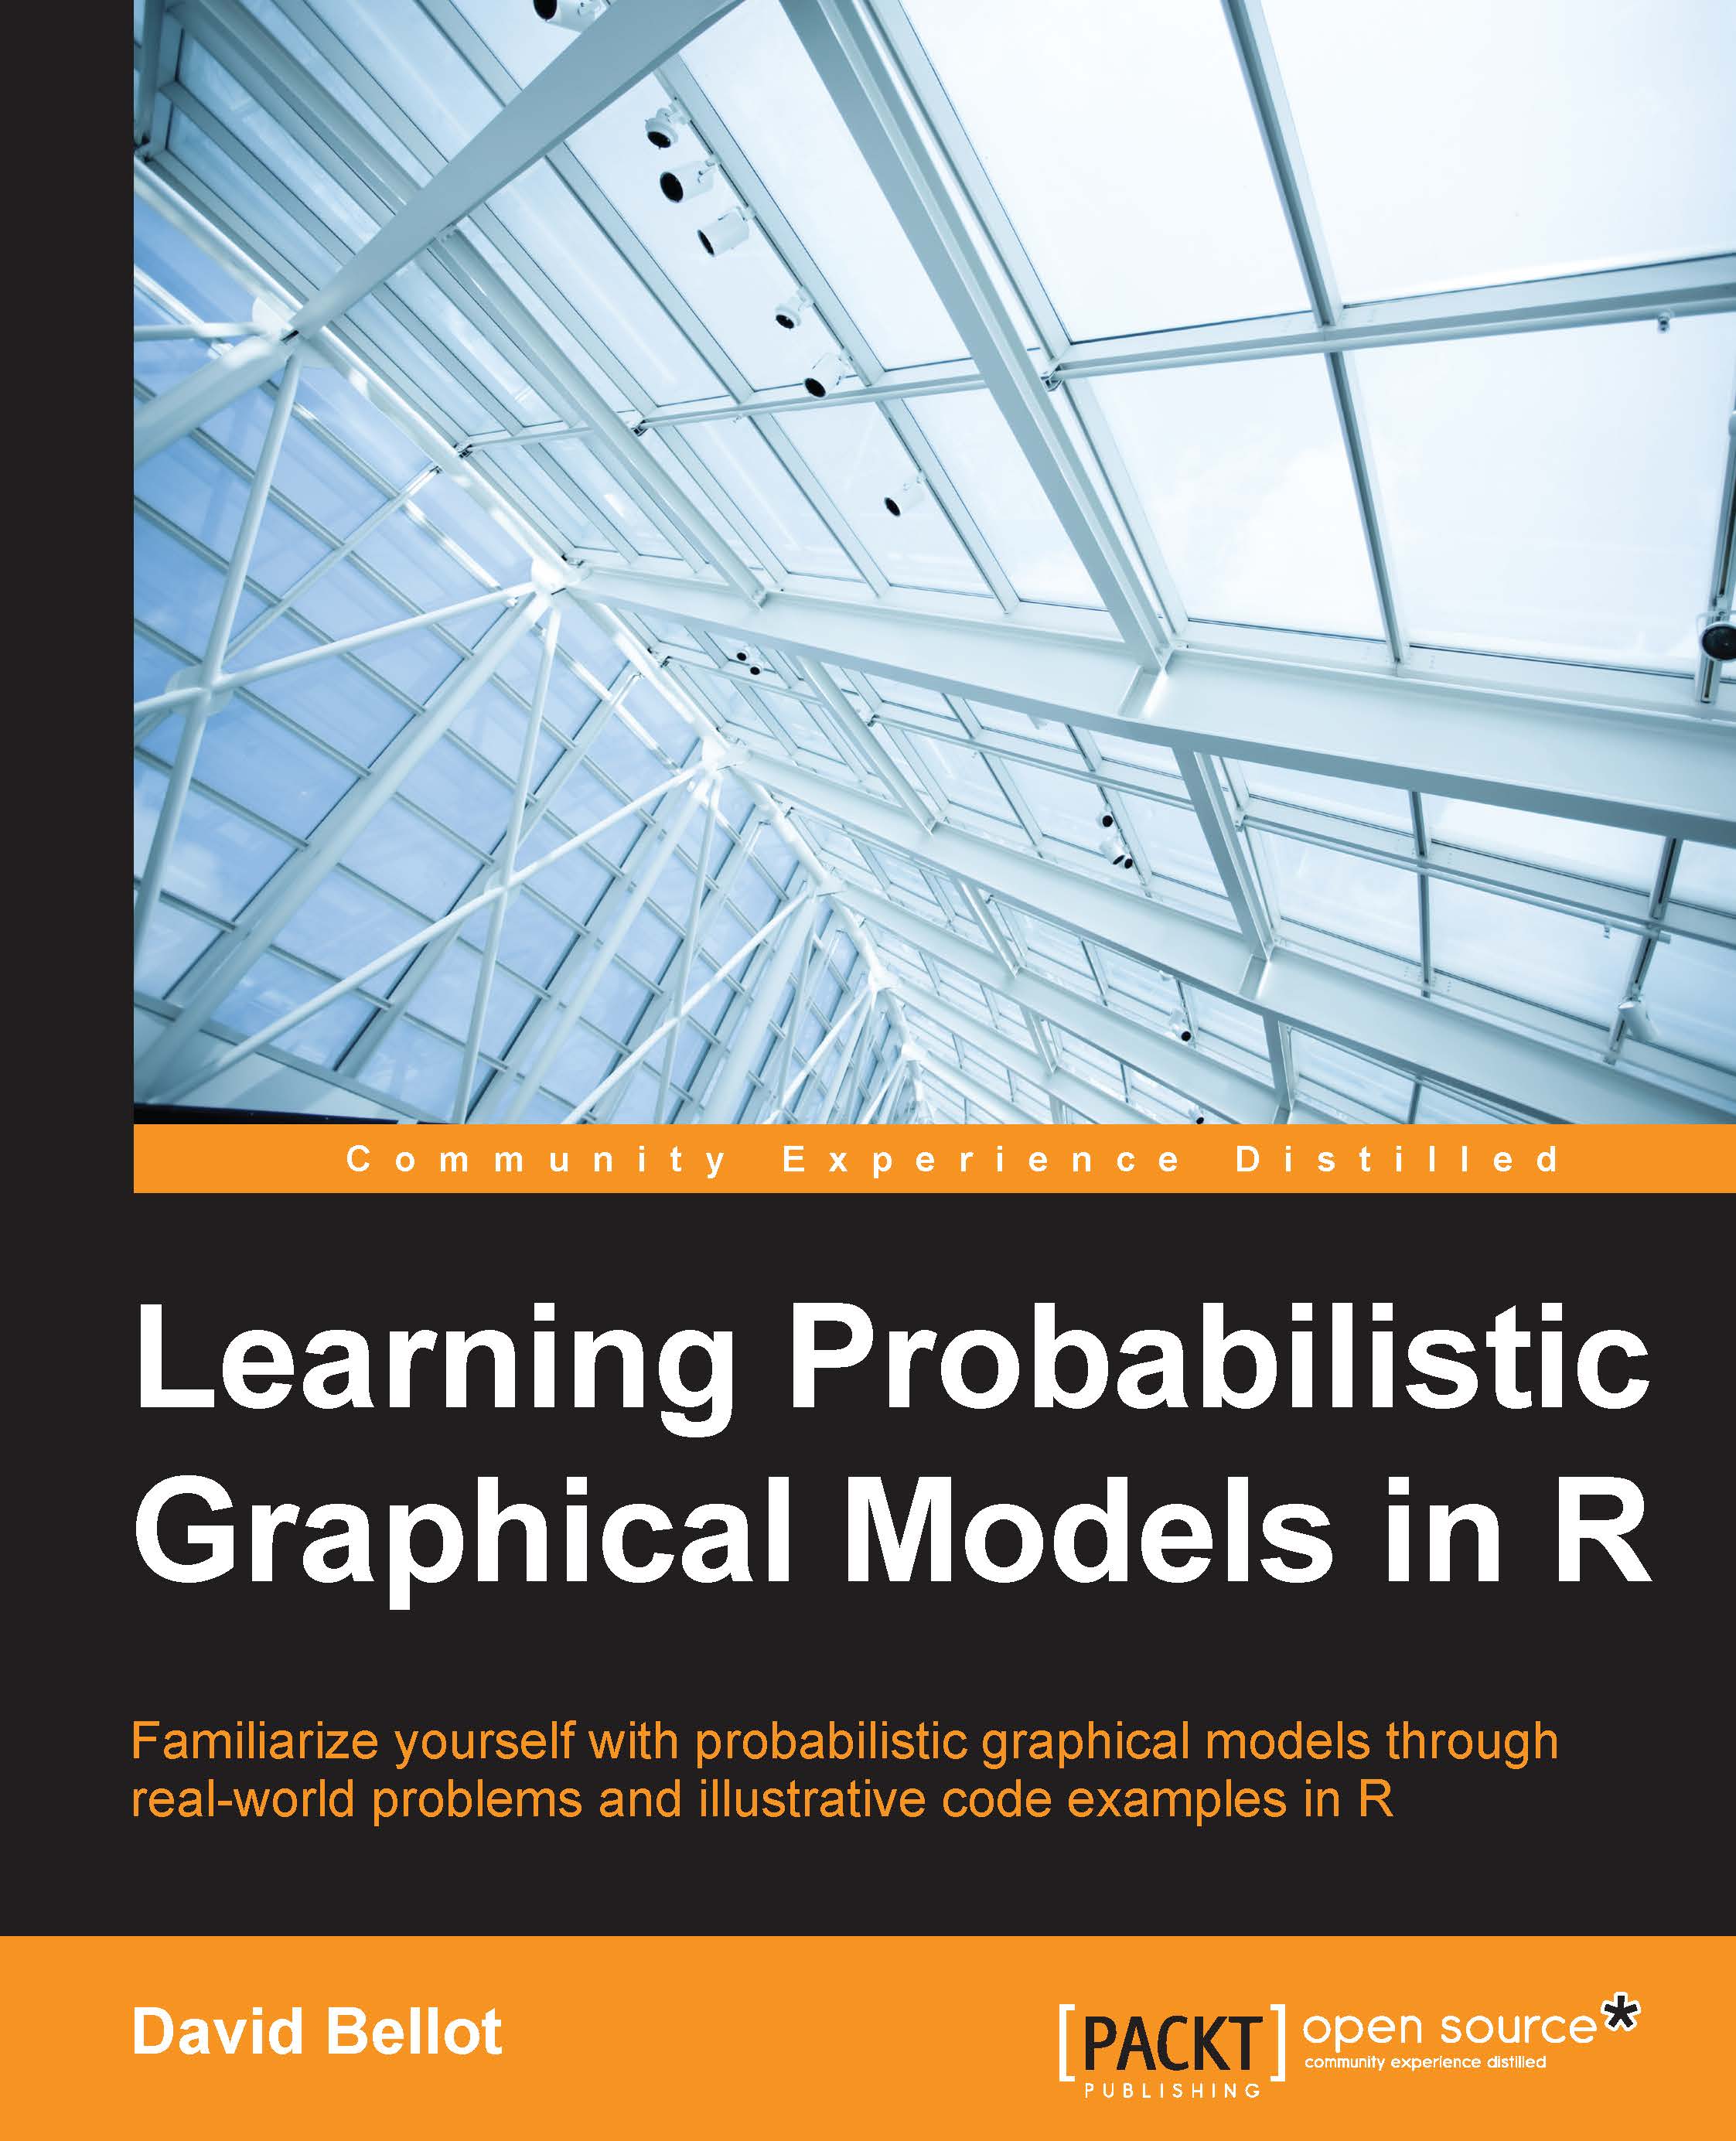 Learning Probabilistic Graphical Models in R - David Bellot